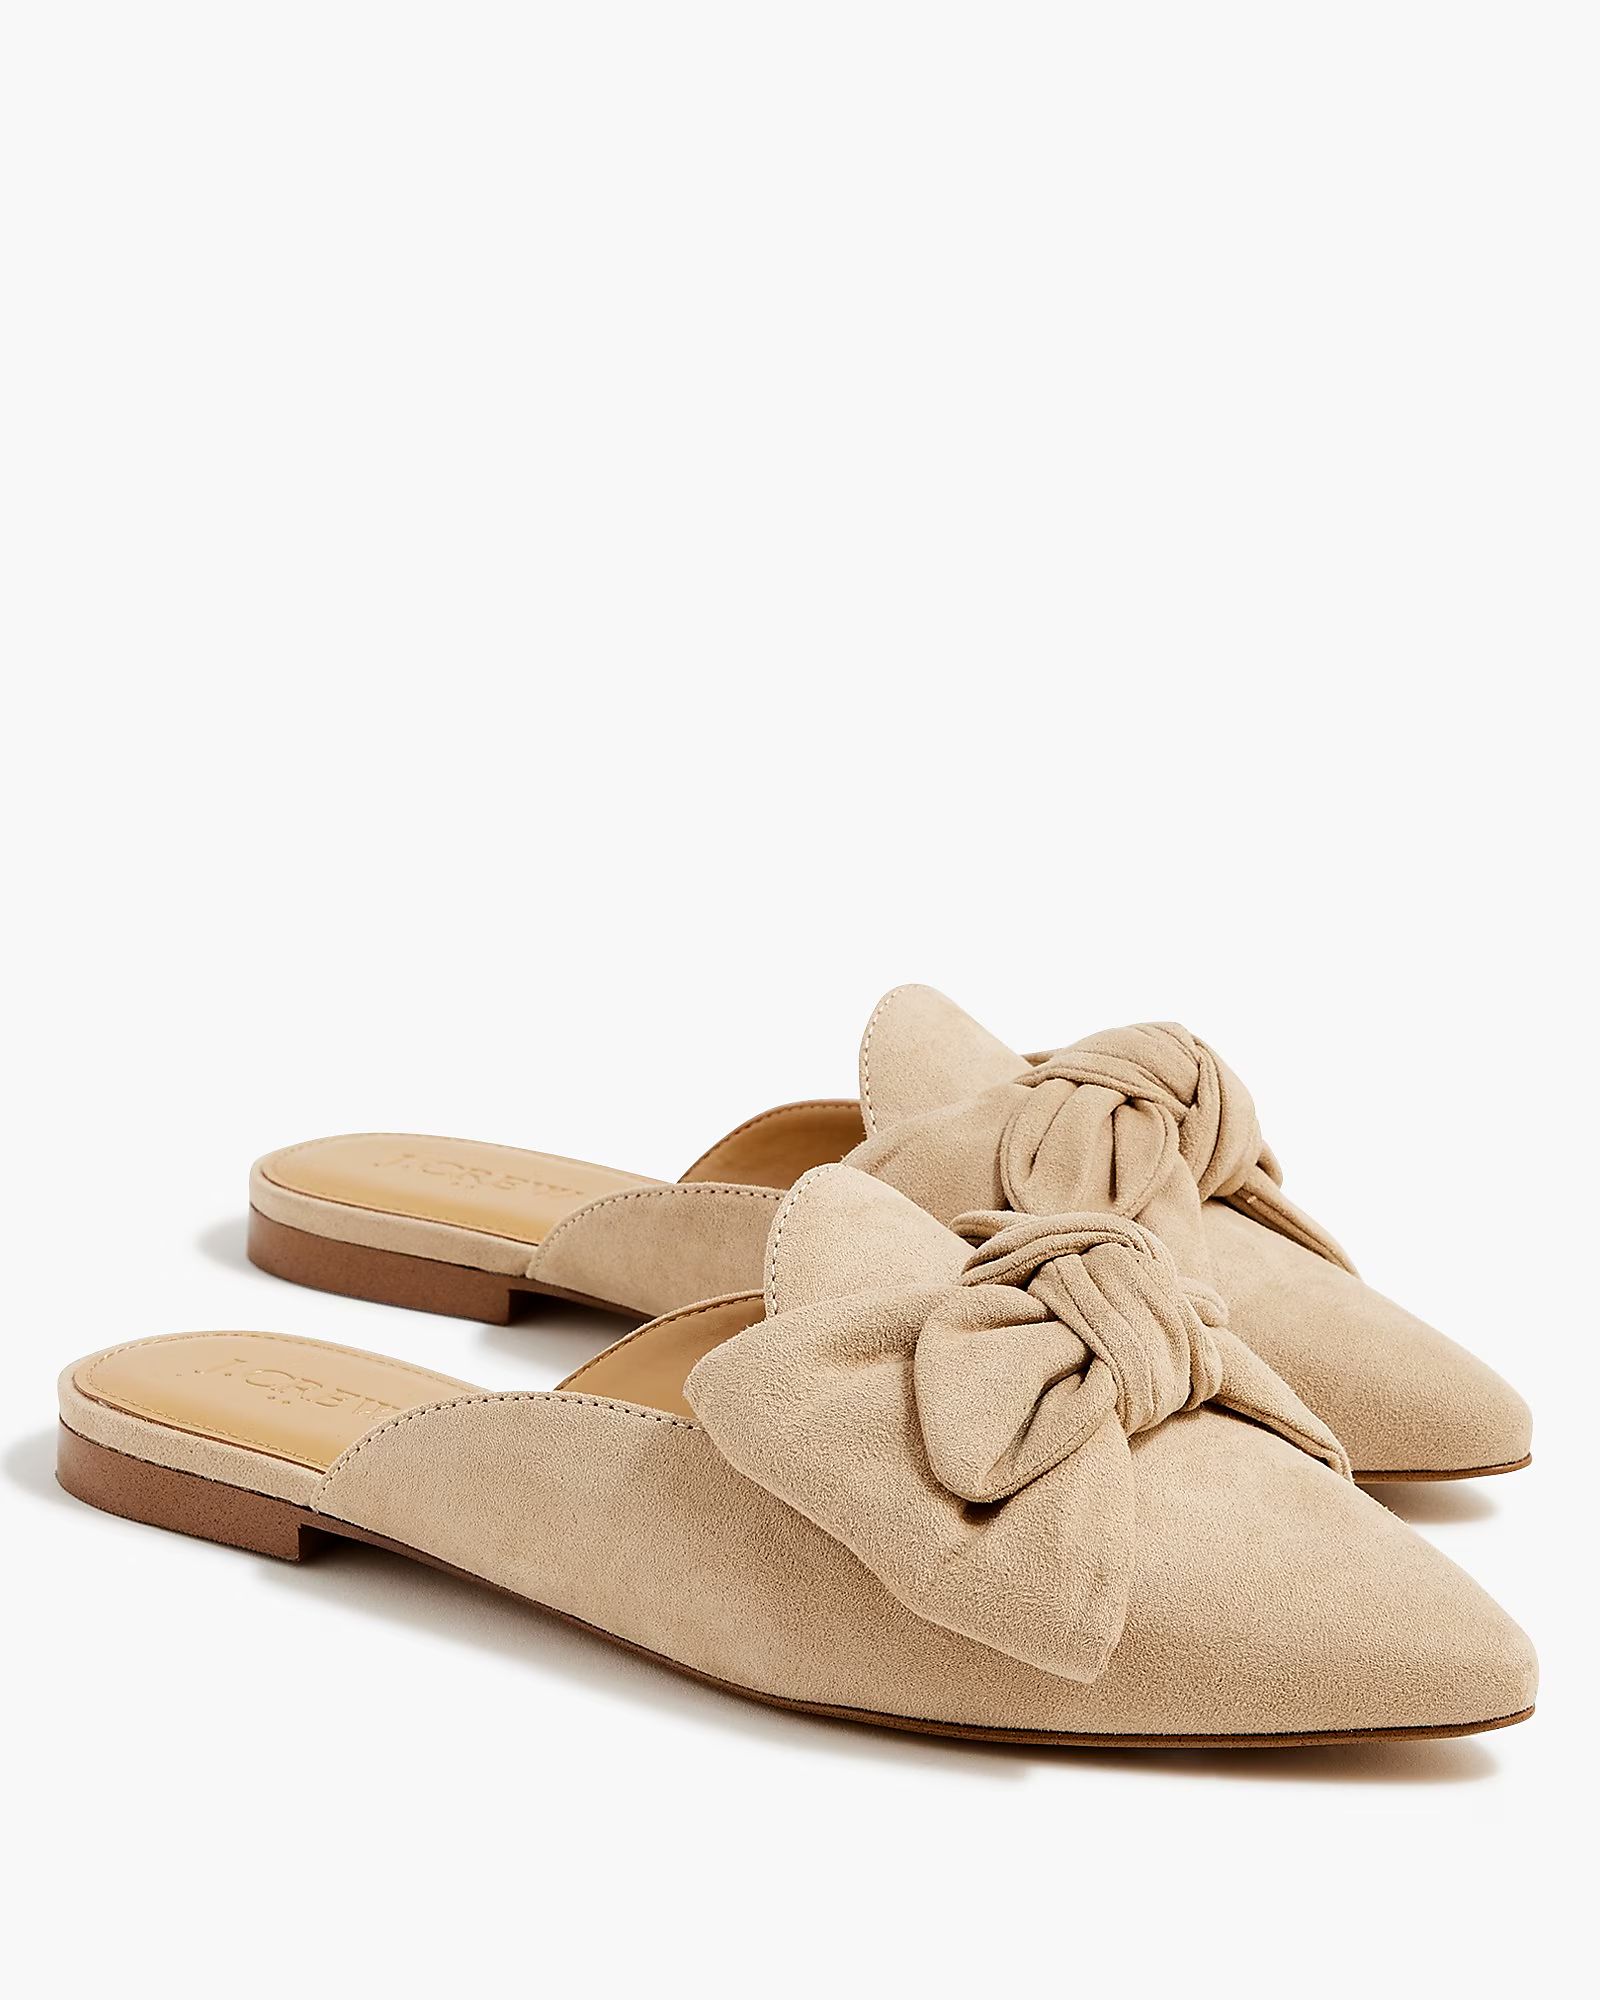 Bow mules | J.Crew Factory